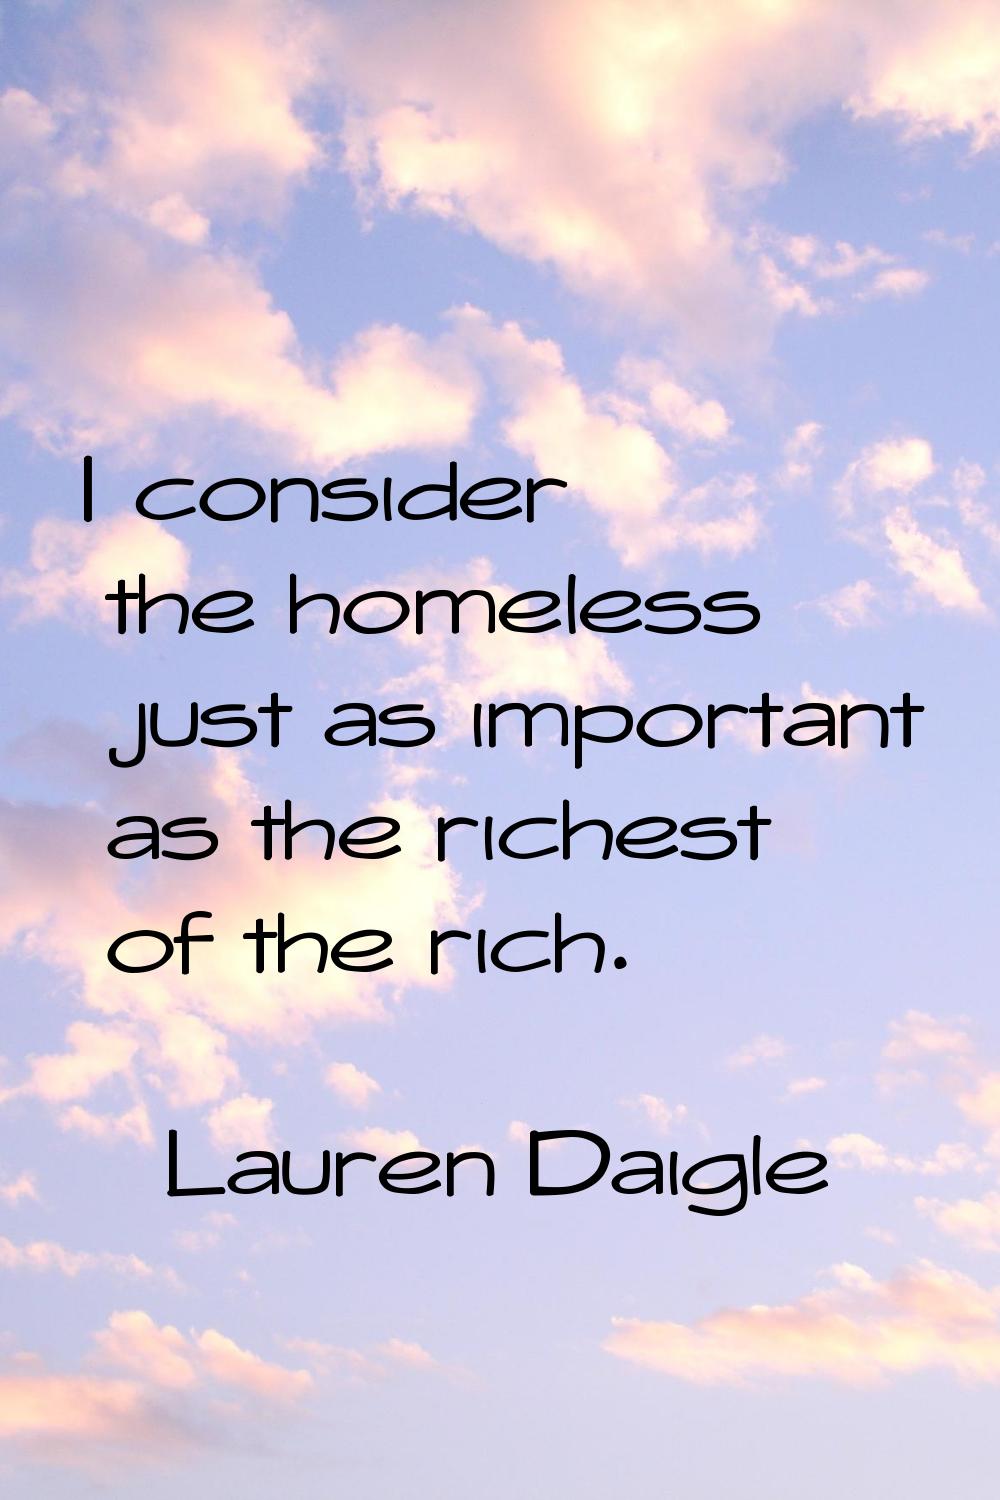 I consider the homeless just as important as the richest of the rich.